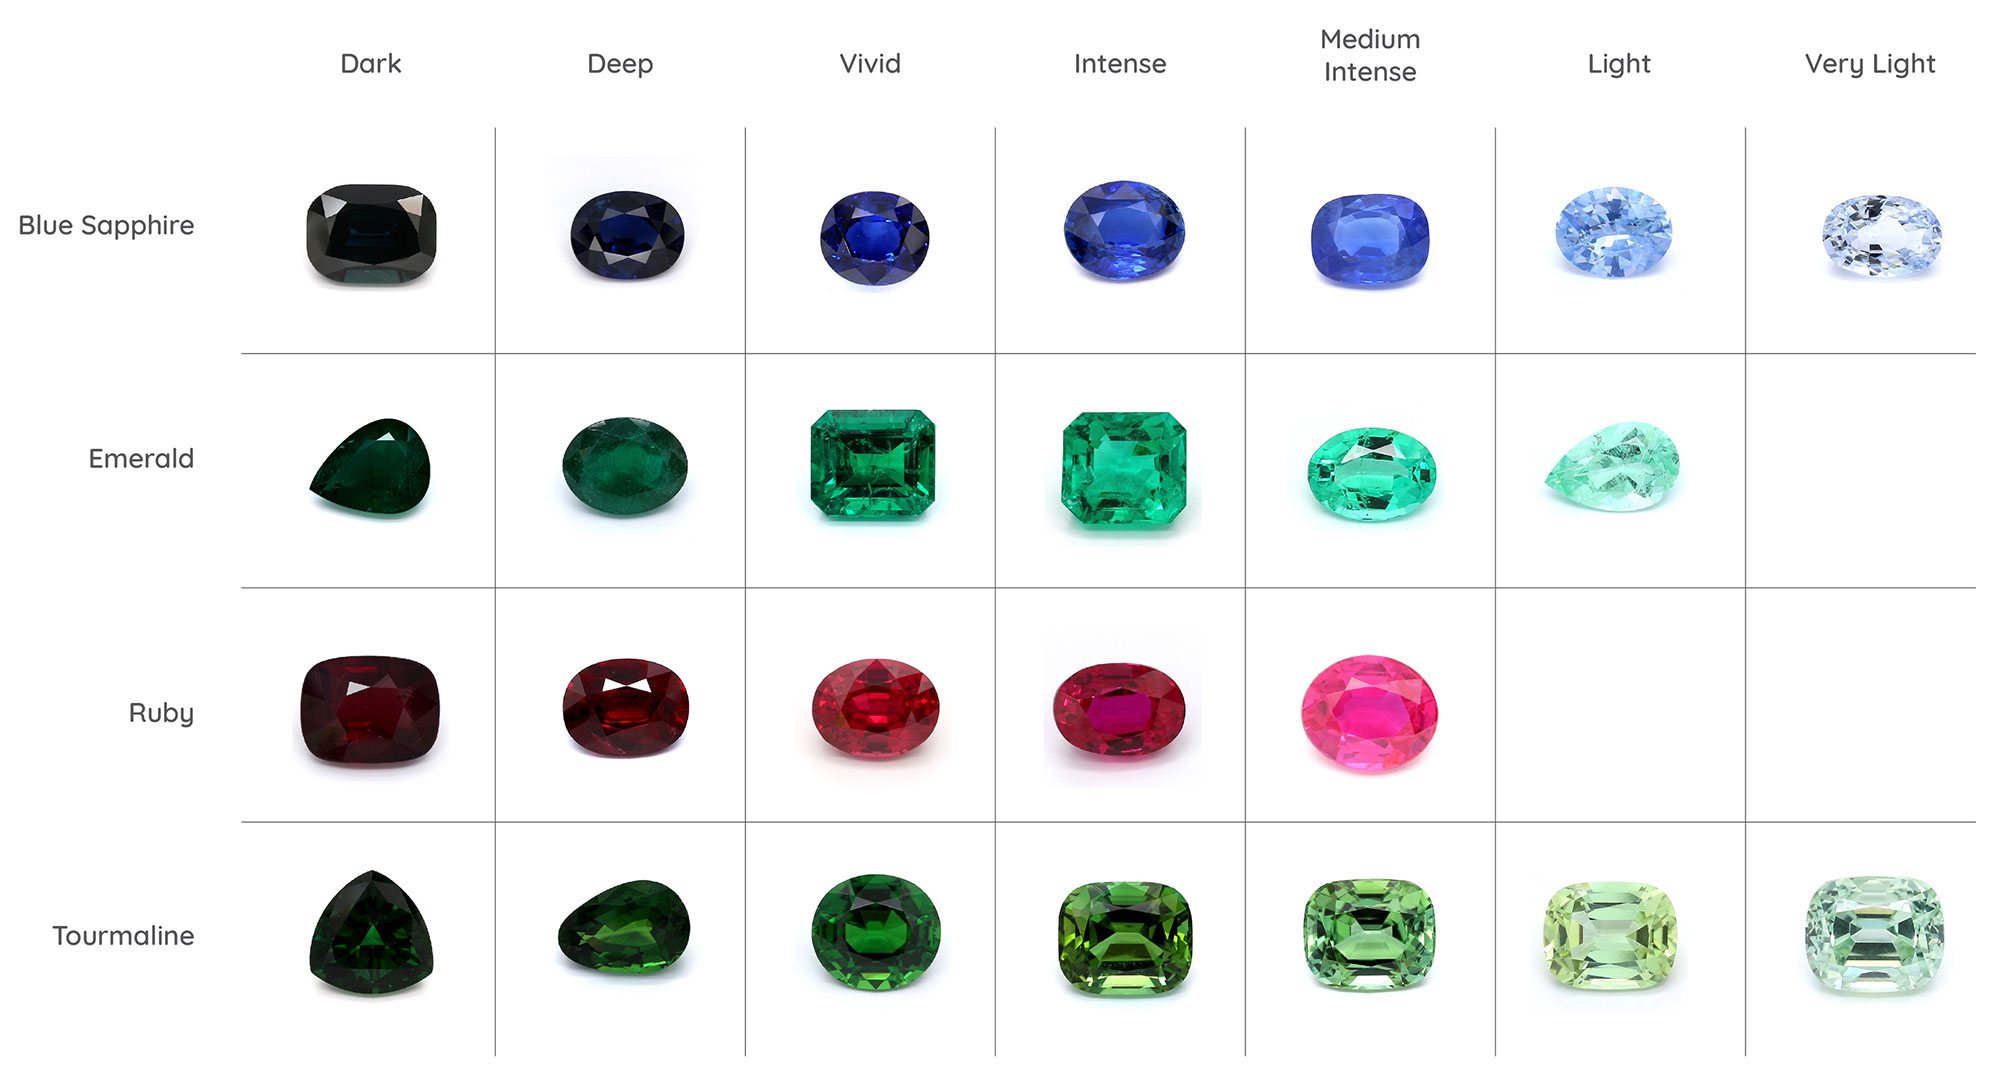 Gemstone colour and intensity grade